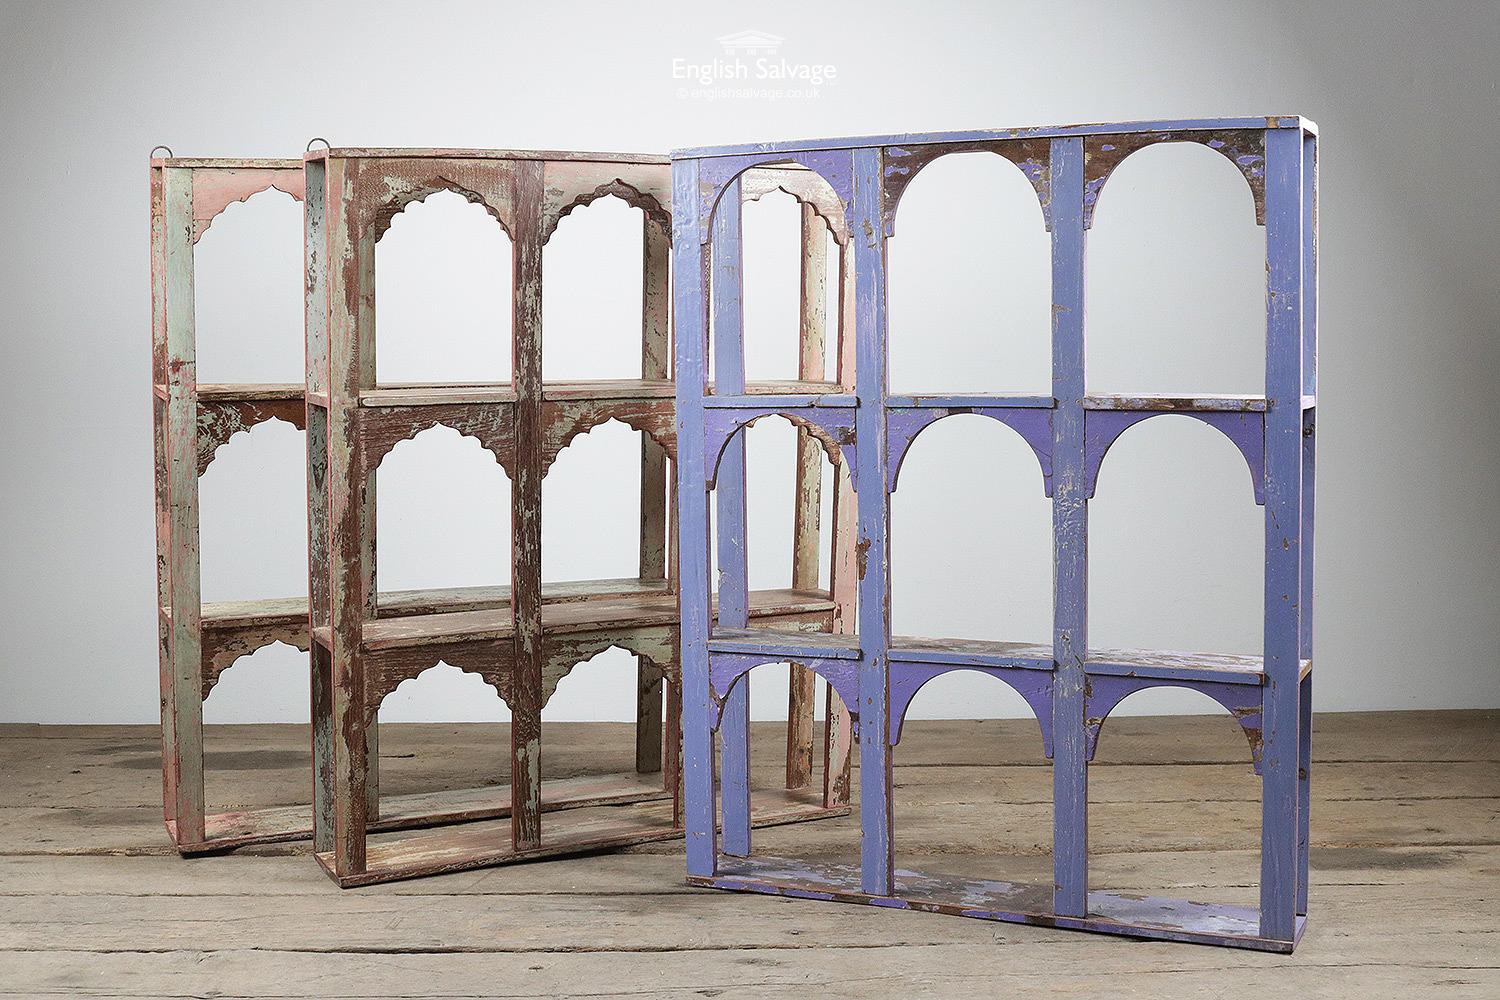 Hardwood arched display cases / shelving units with nine sections each. Can be wall-mounted (fixing rings present) or freestanding. Distressed paint and waxed finish. Measurements below +/- 1cm. Marks and chips throughout.